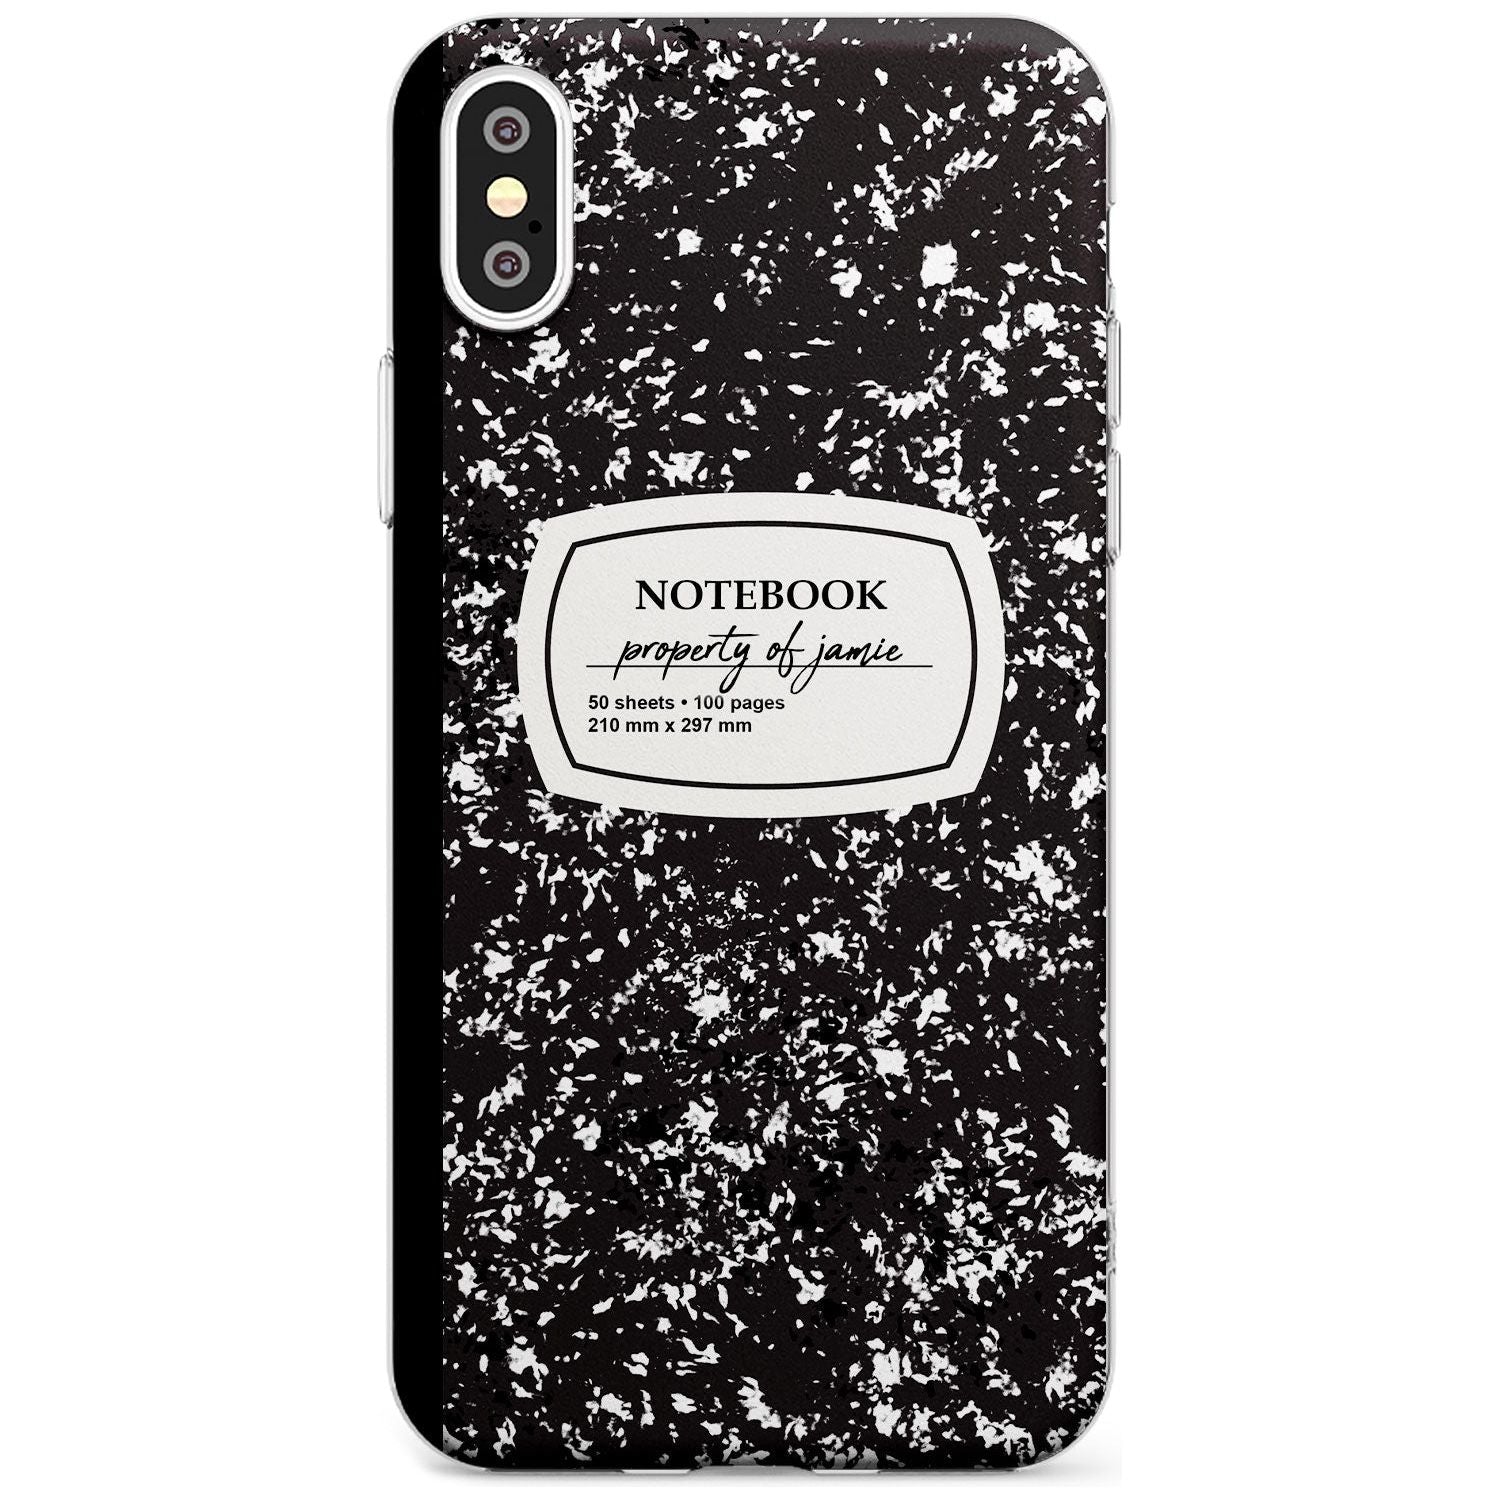 Custom Notebook Cover Black Impact Phone Case for iPhone X XS Max XR